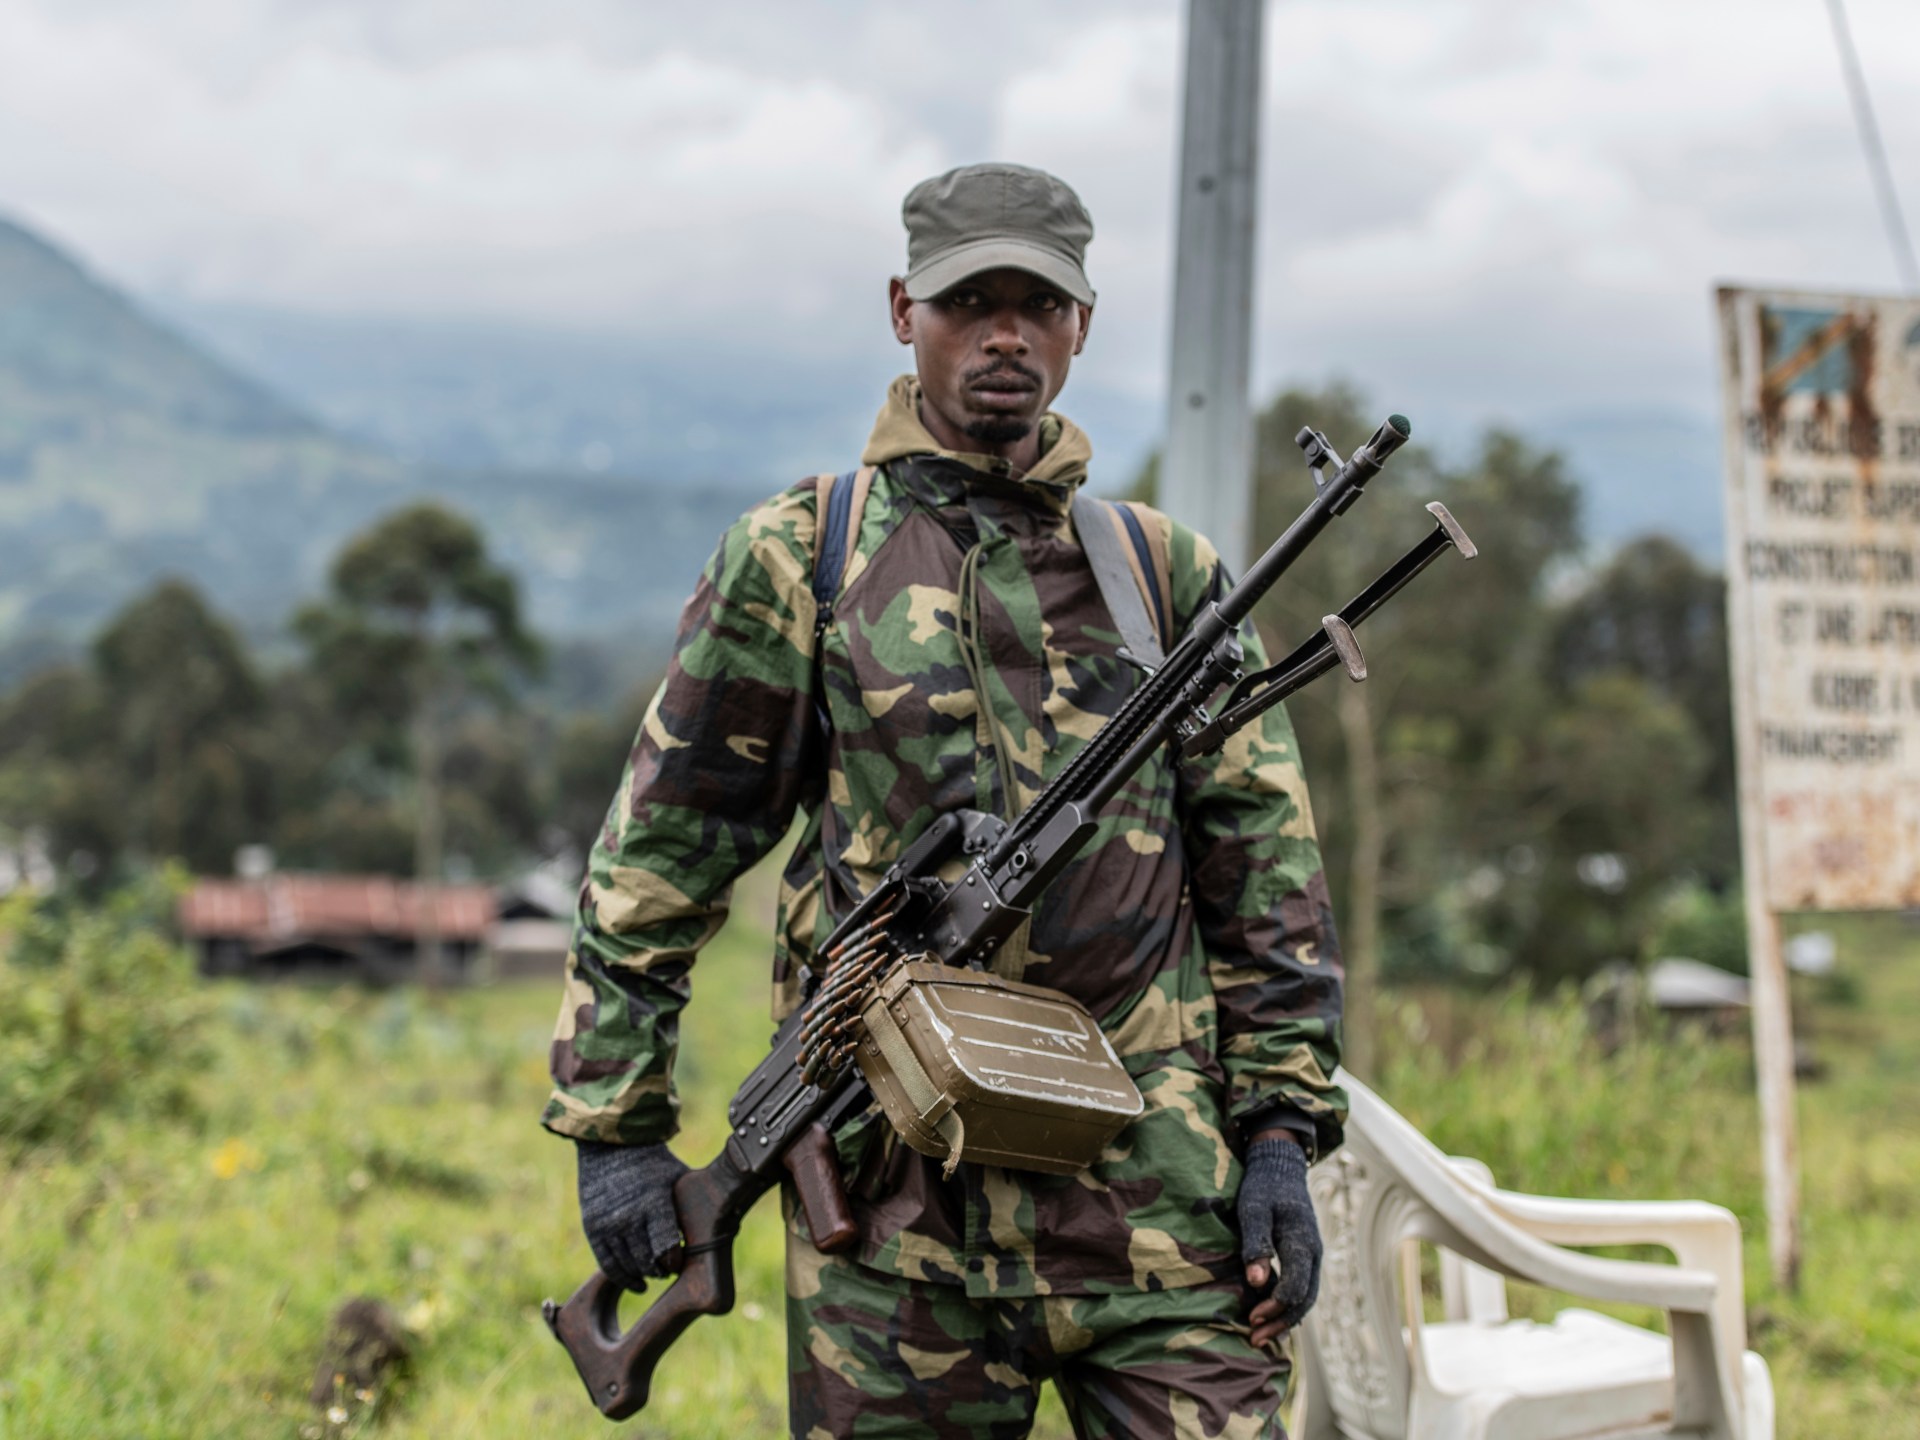 DRC files second complaint to ICC against Rwanda army, M23 rebels